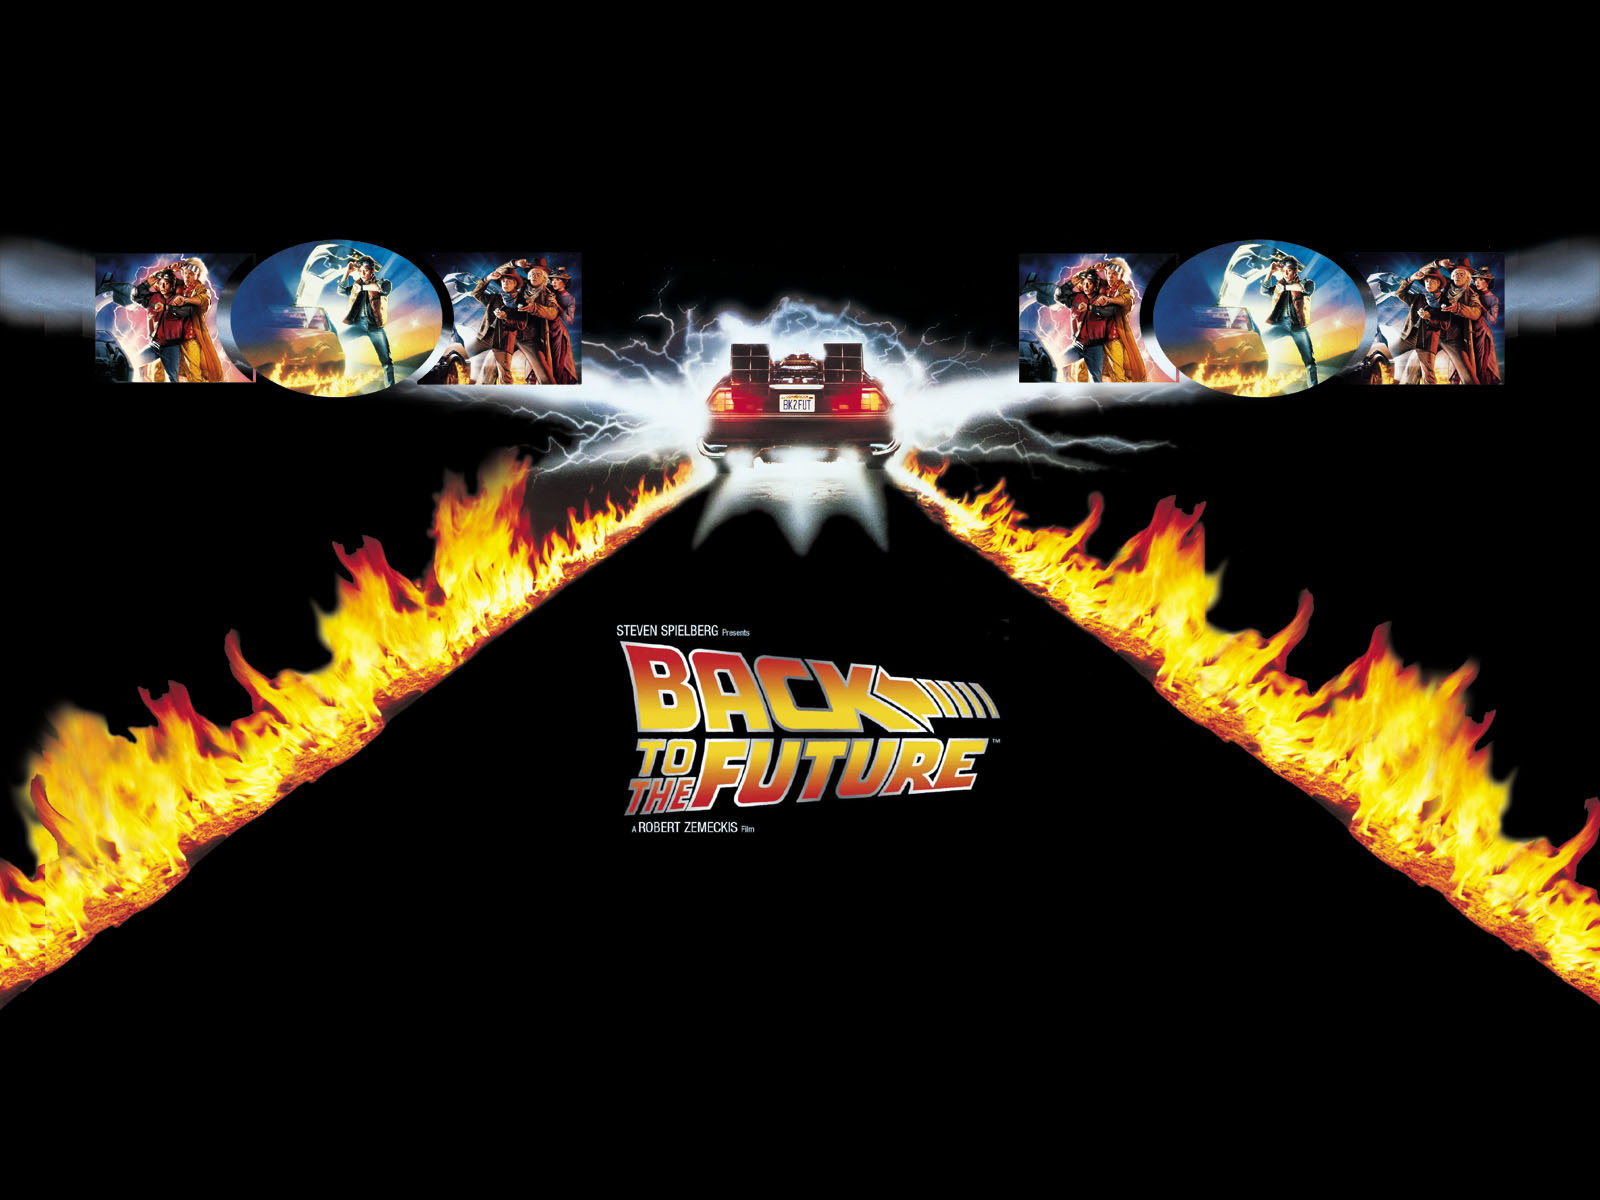 Back To The Future Wallpapers Hd For Desktop Backgrounds